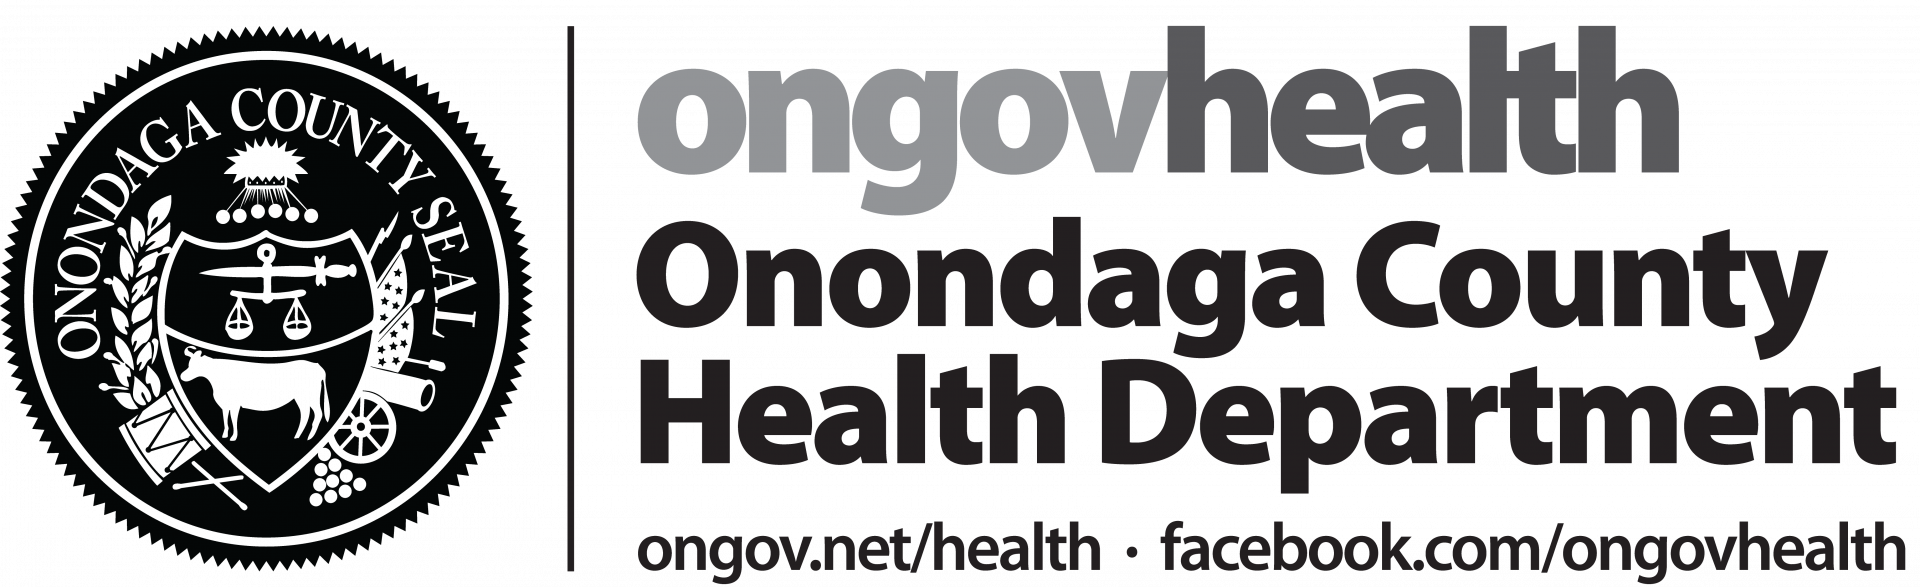 Promotional graphic for the Onondaga County Health Department